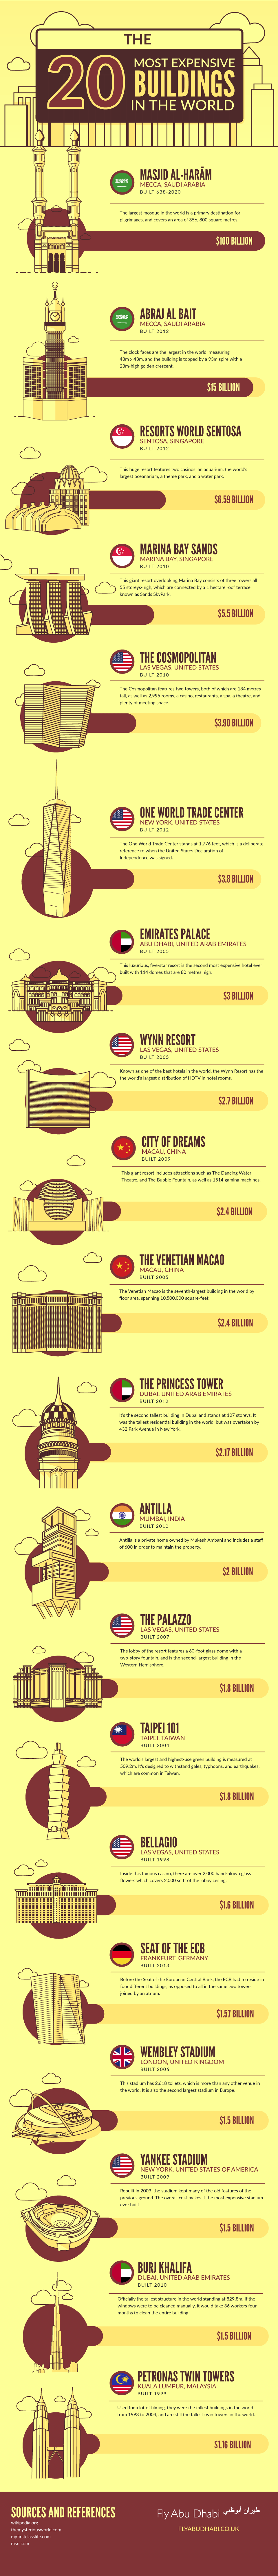 most-expensive-buildings